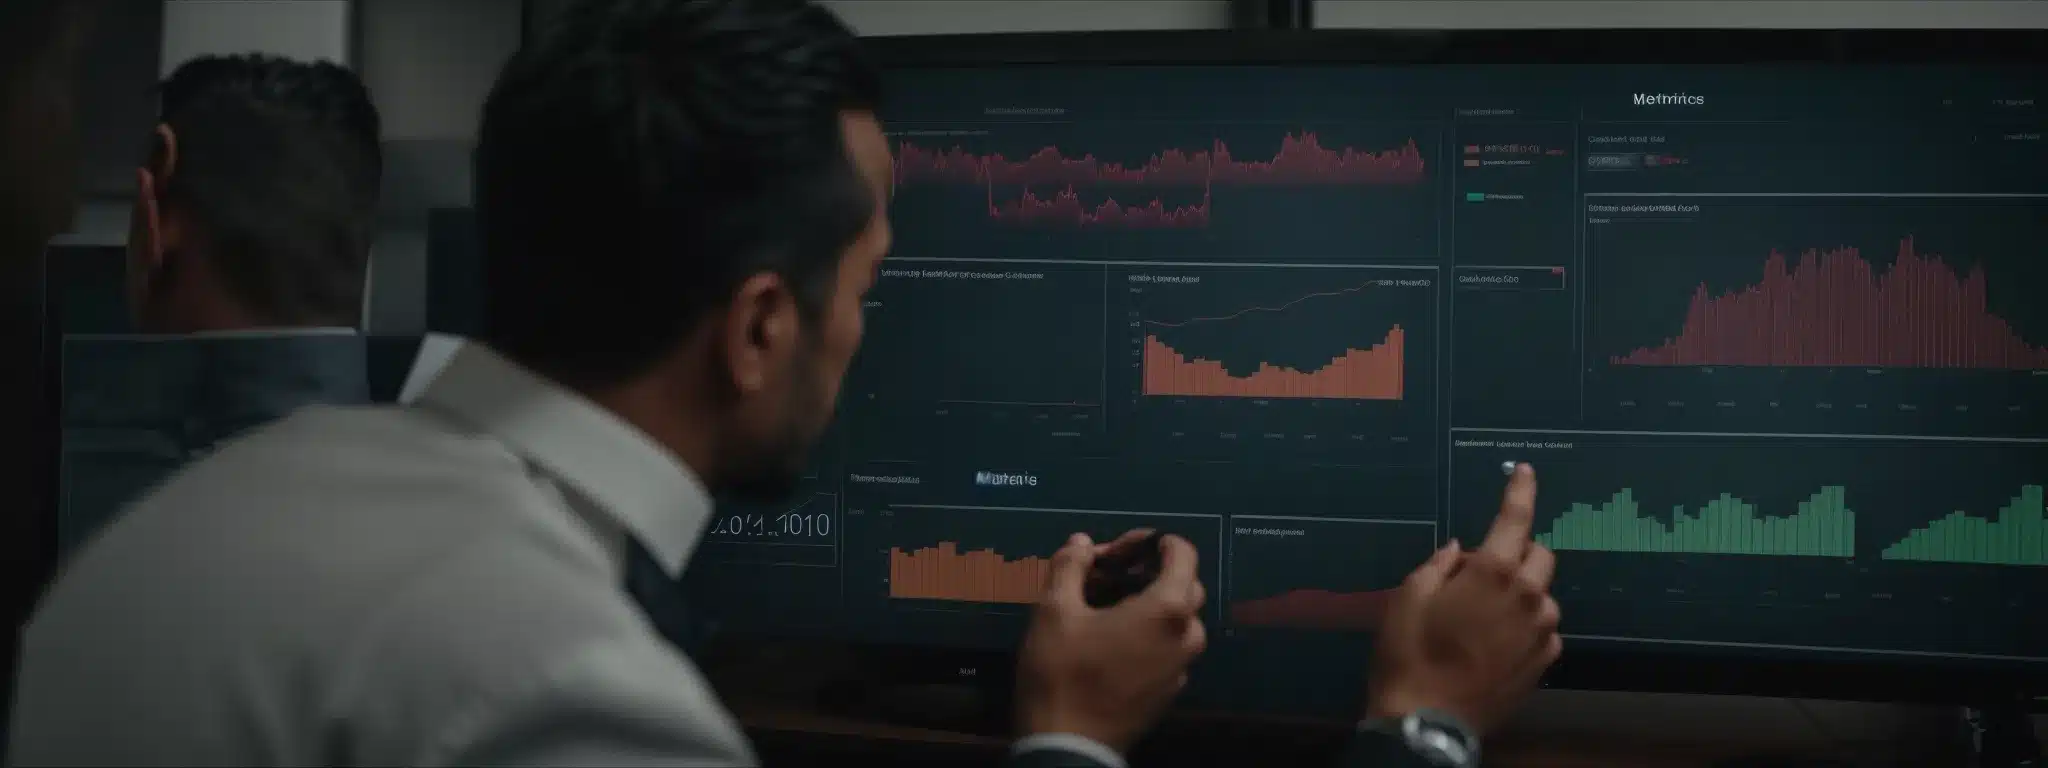 A Businessperson Examines A Dashboard Displaying Customer Satisfaction Metrics And Charts.